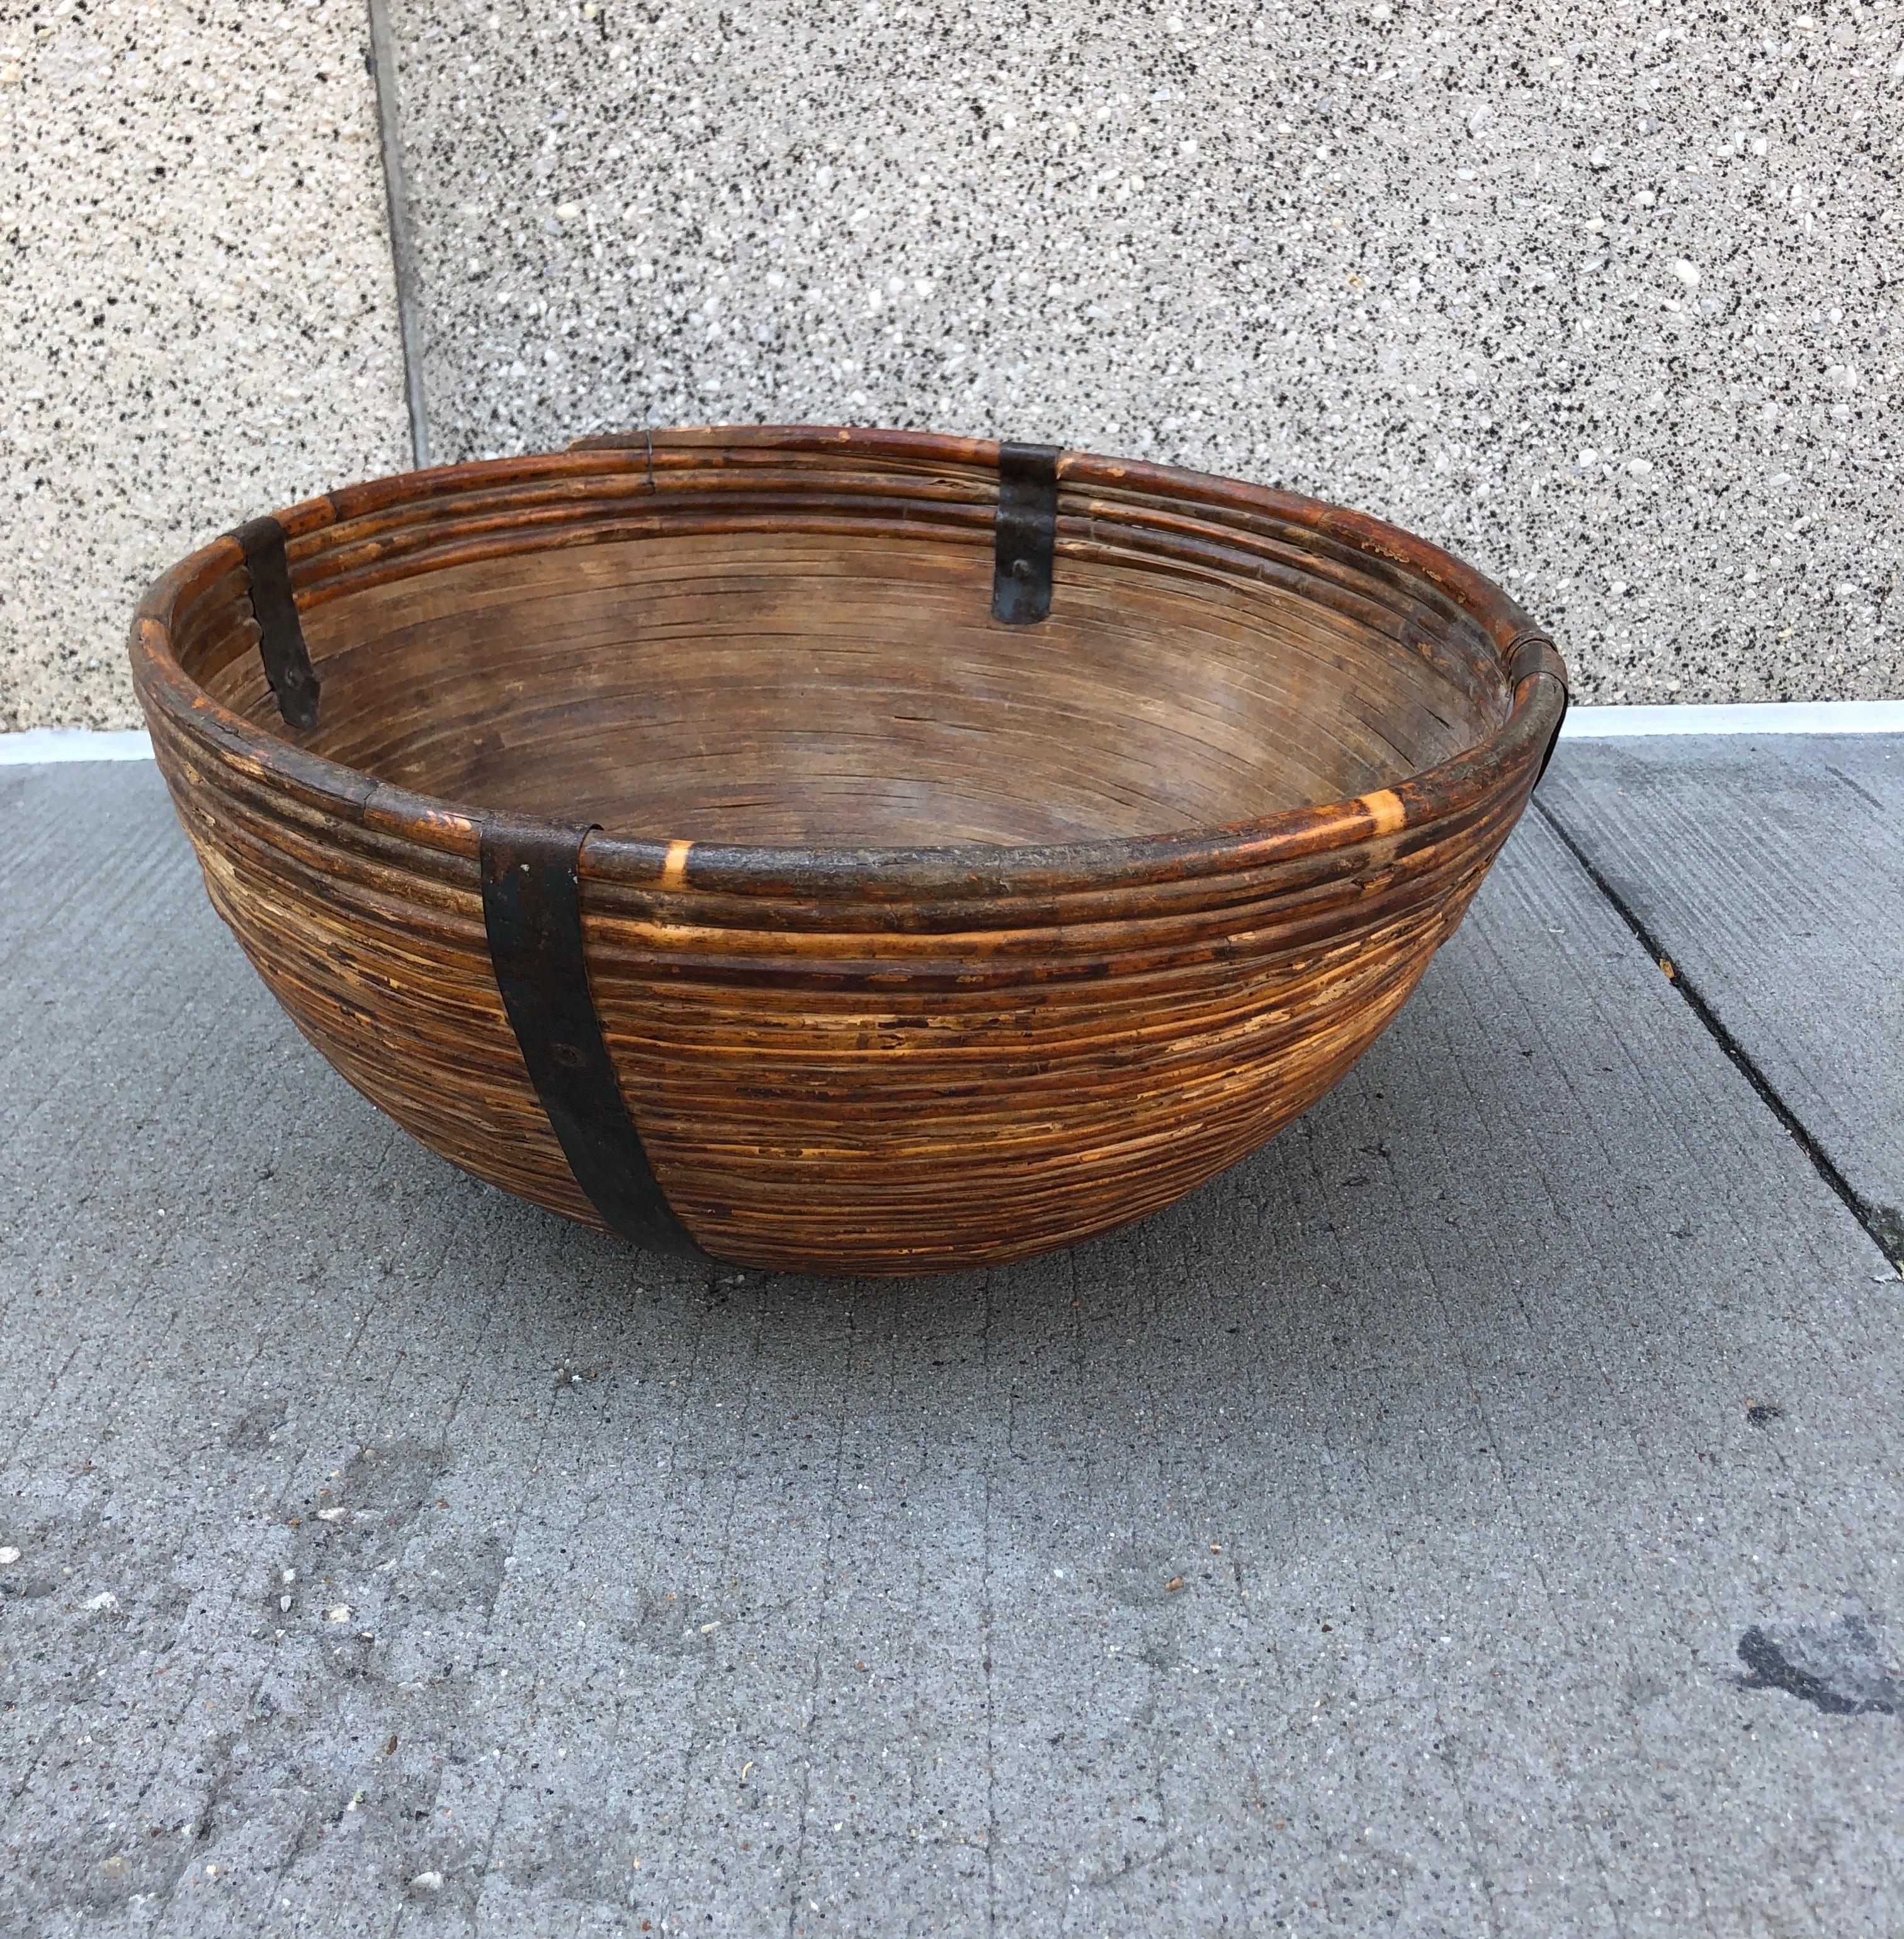 Bamboo Fiber/Wood Bowl with Metal Supports